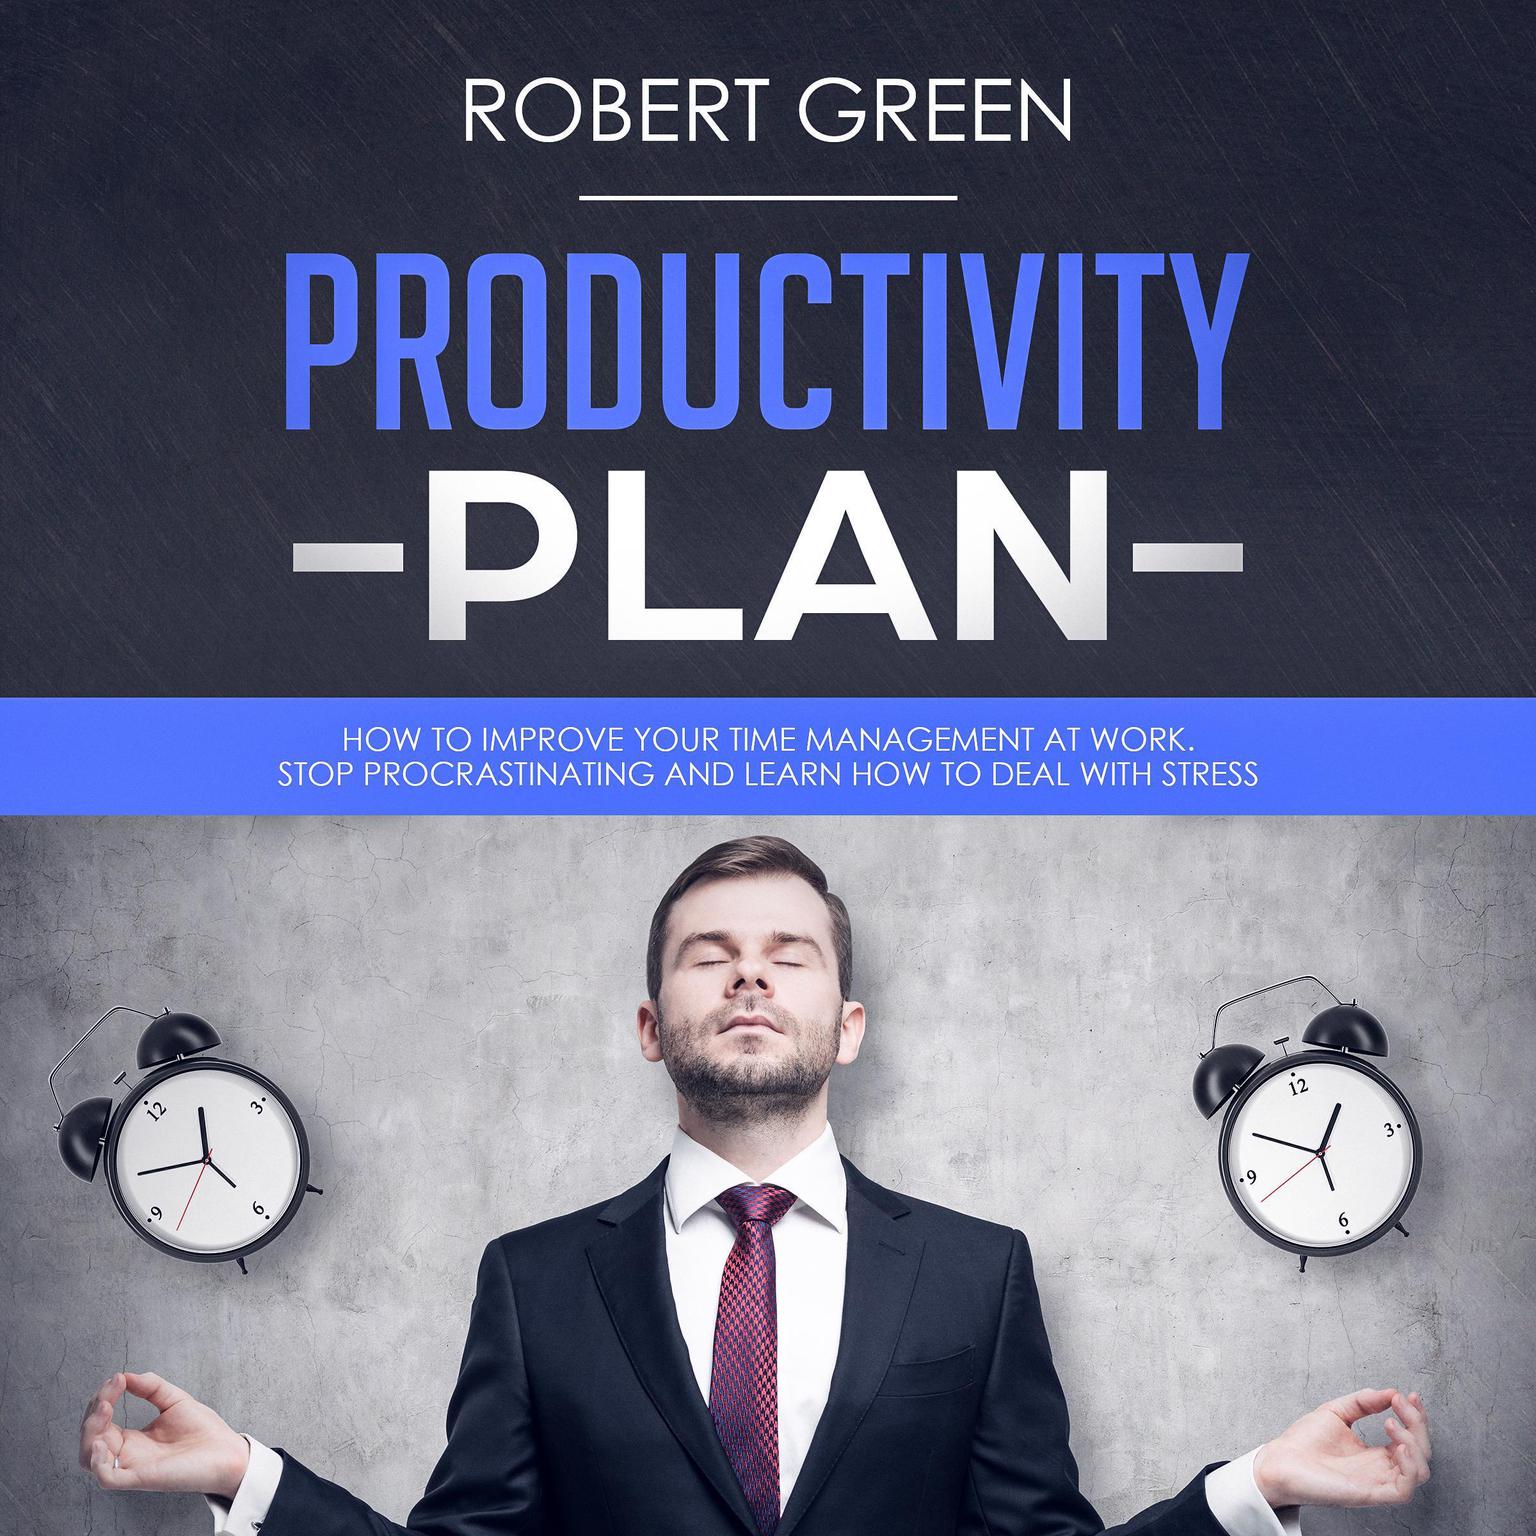 PRODUCTIVITY PLAN: HOW TO IMPROVE YOUR TIME MANAGEMENT AT WORK. STOP PROCRASTINATING AND LEARN HOW TO DEAL WITH STRESS Audiobook, by Robert Green